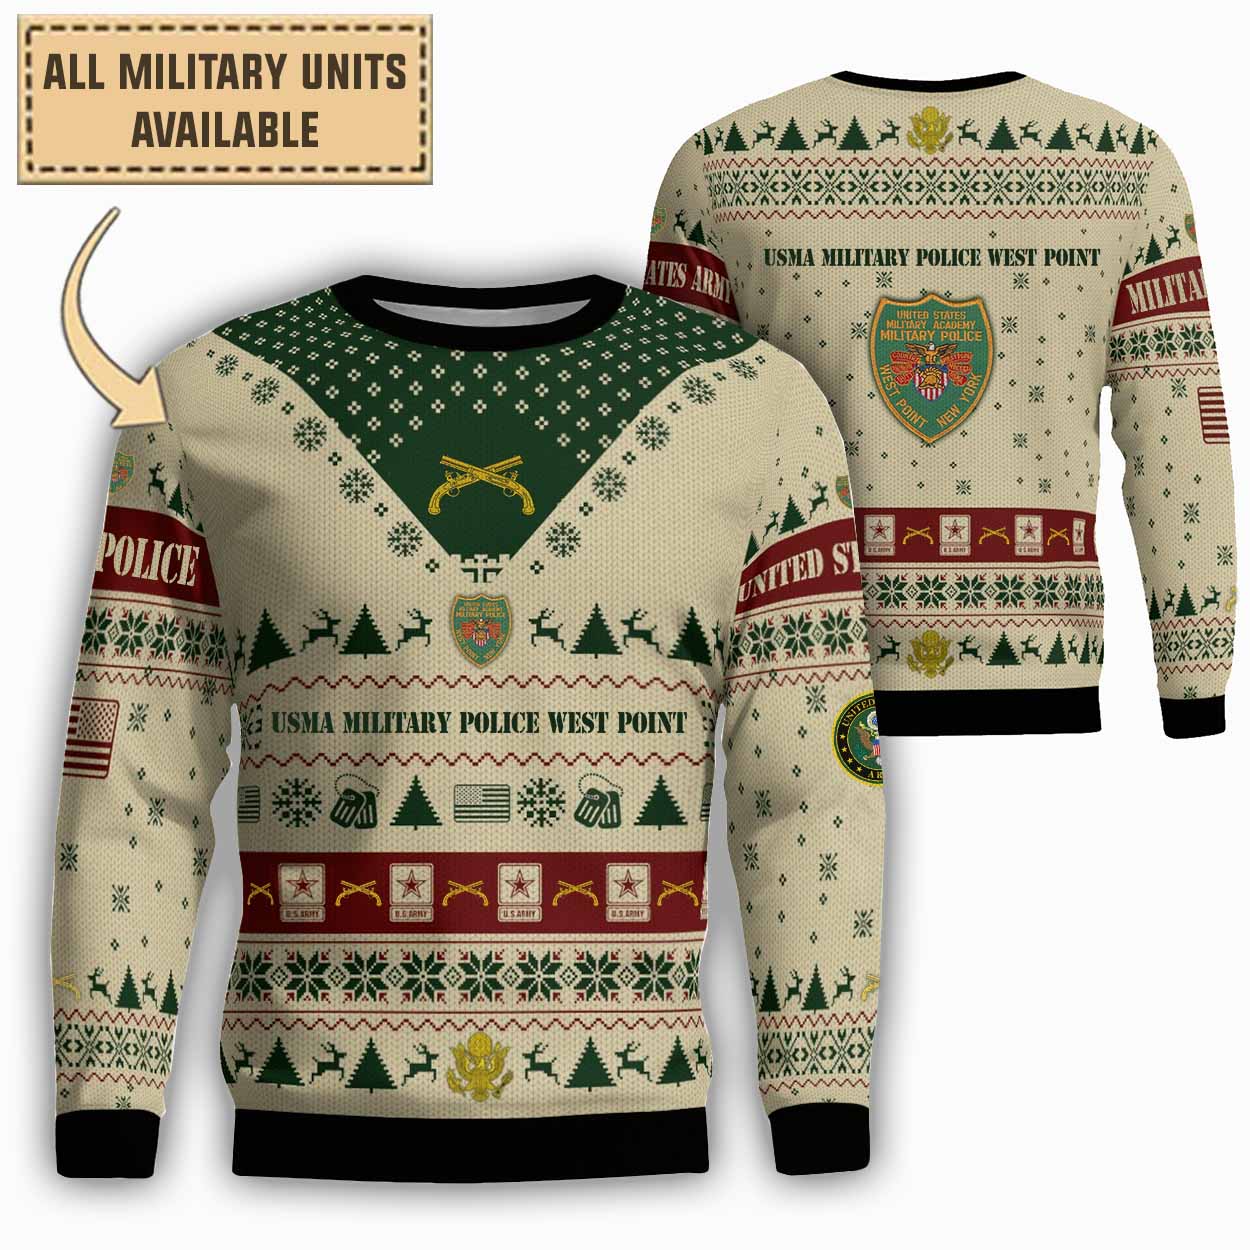 USMA Military Police West Point_Lightweight Sweater